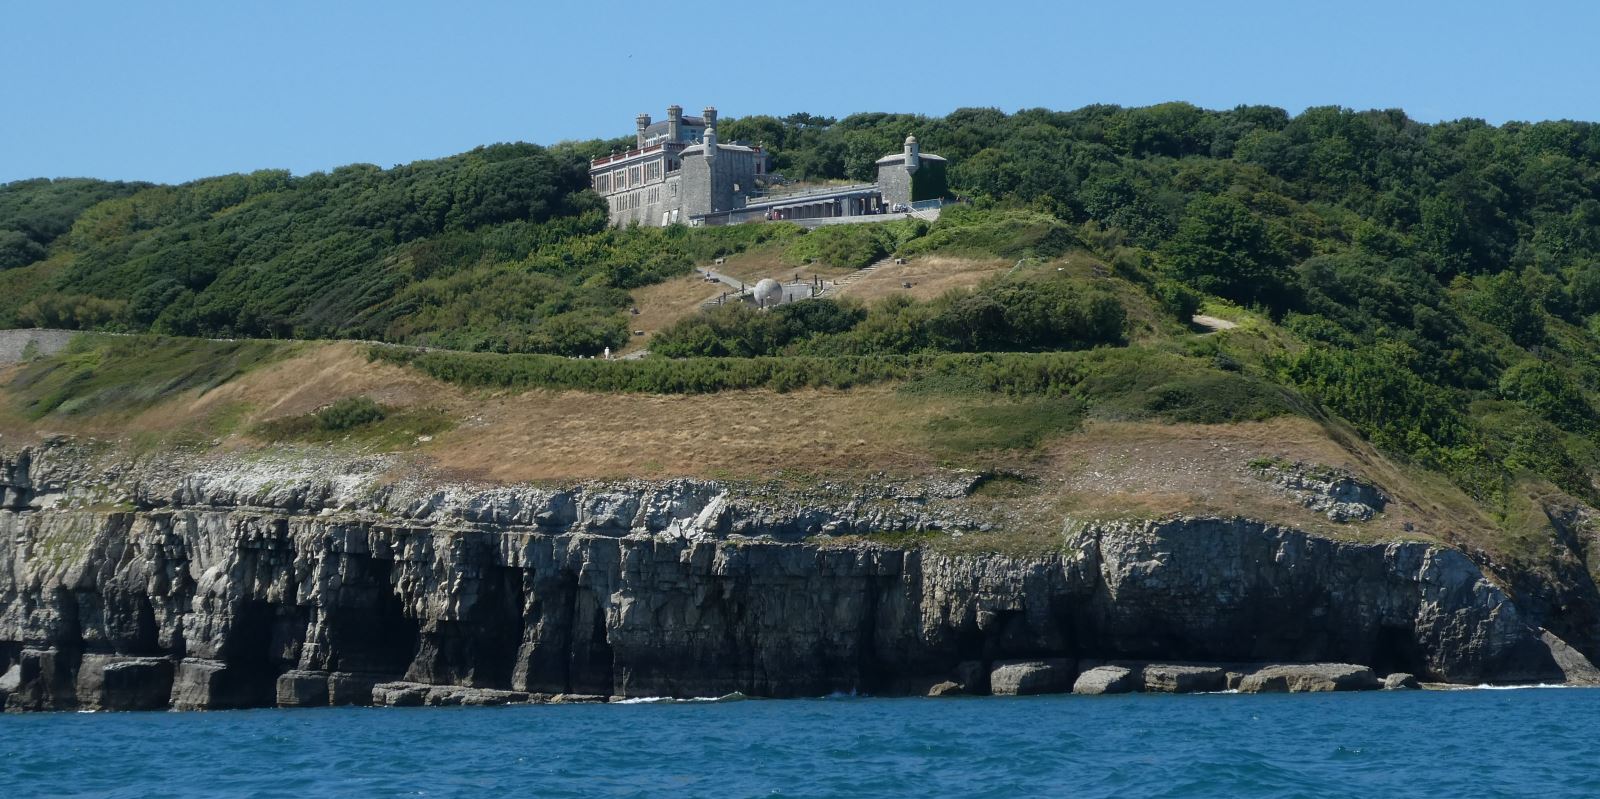 A view of Durlston Castle from the sea